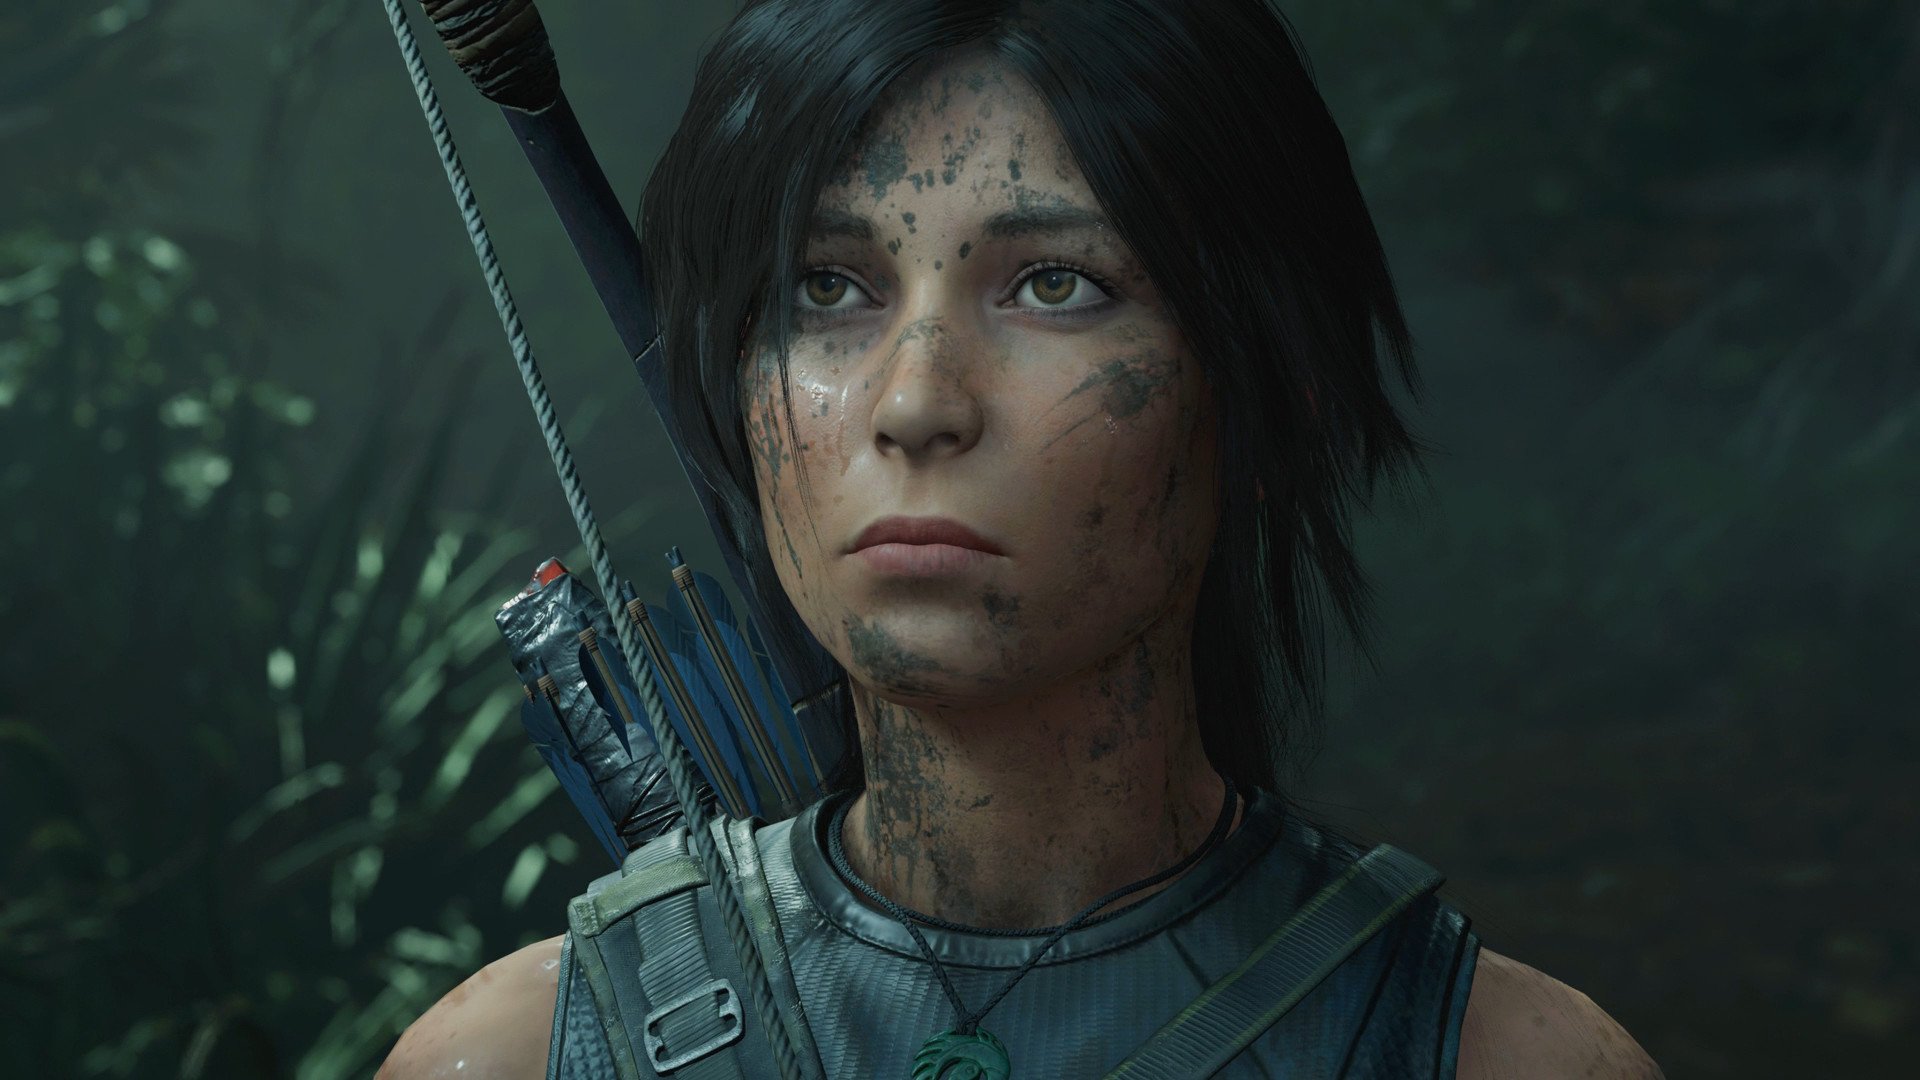 Implementing HDR in 'Rise of the Tomb Raider